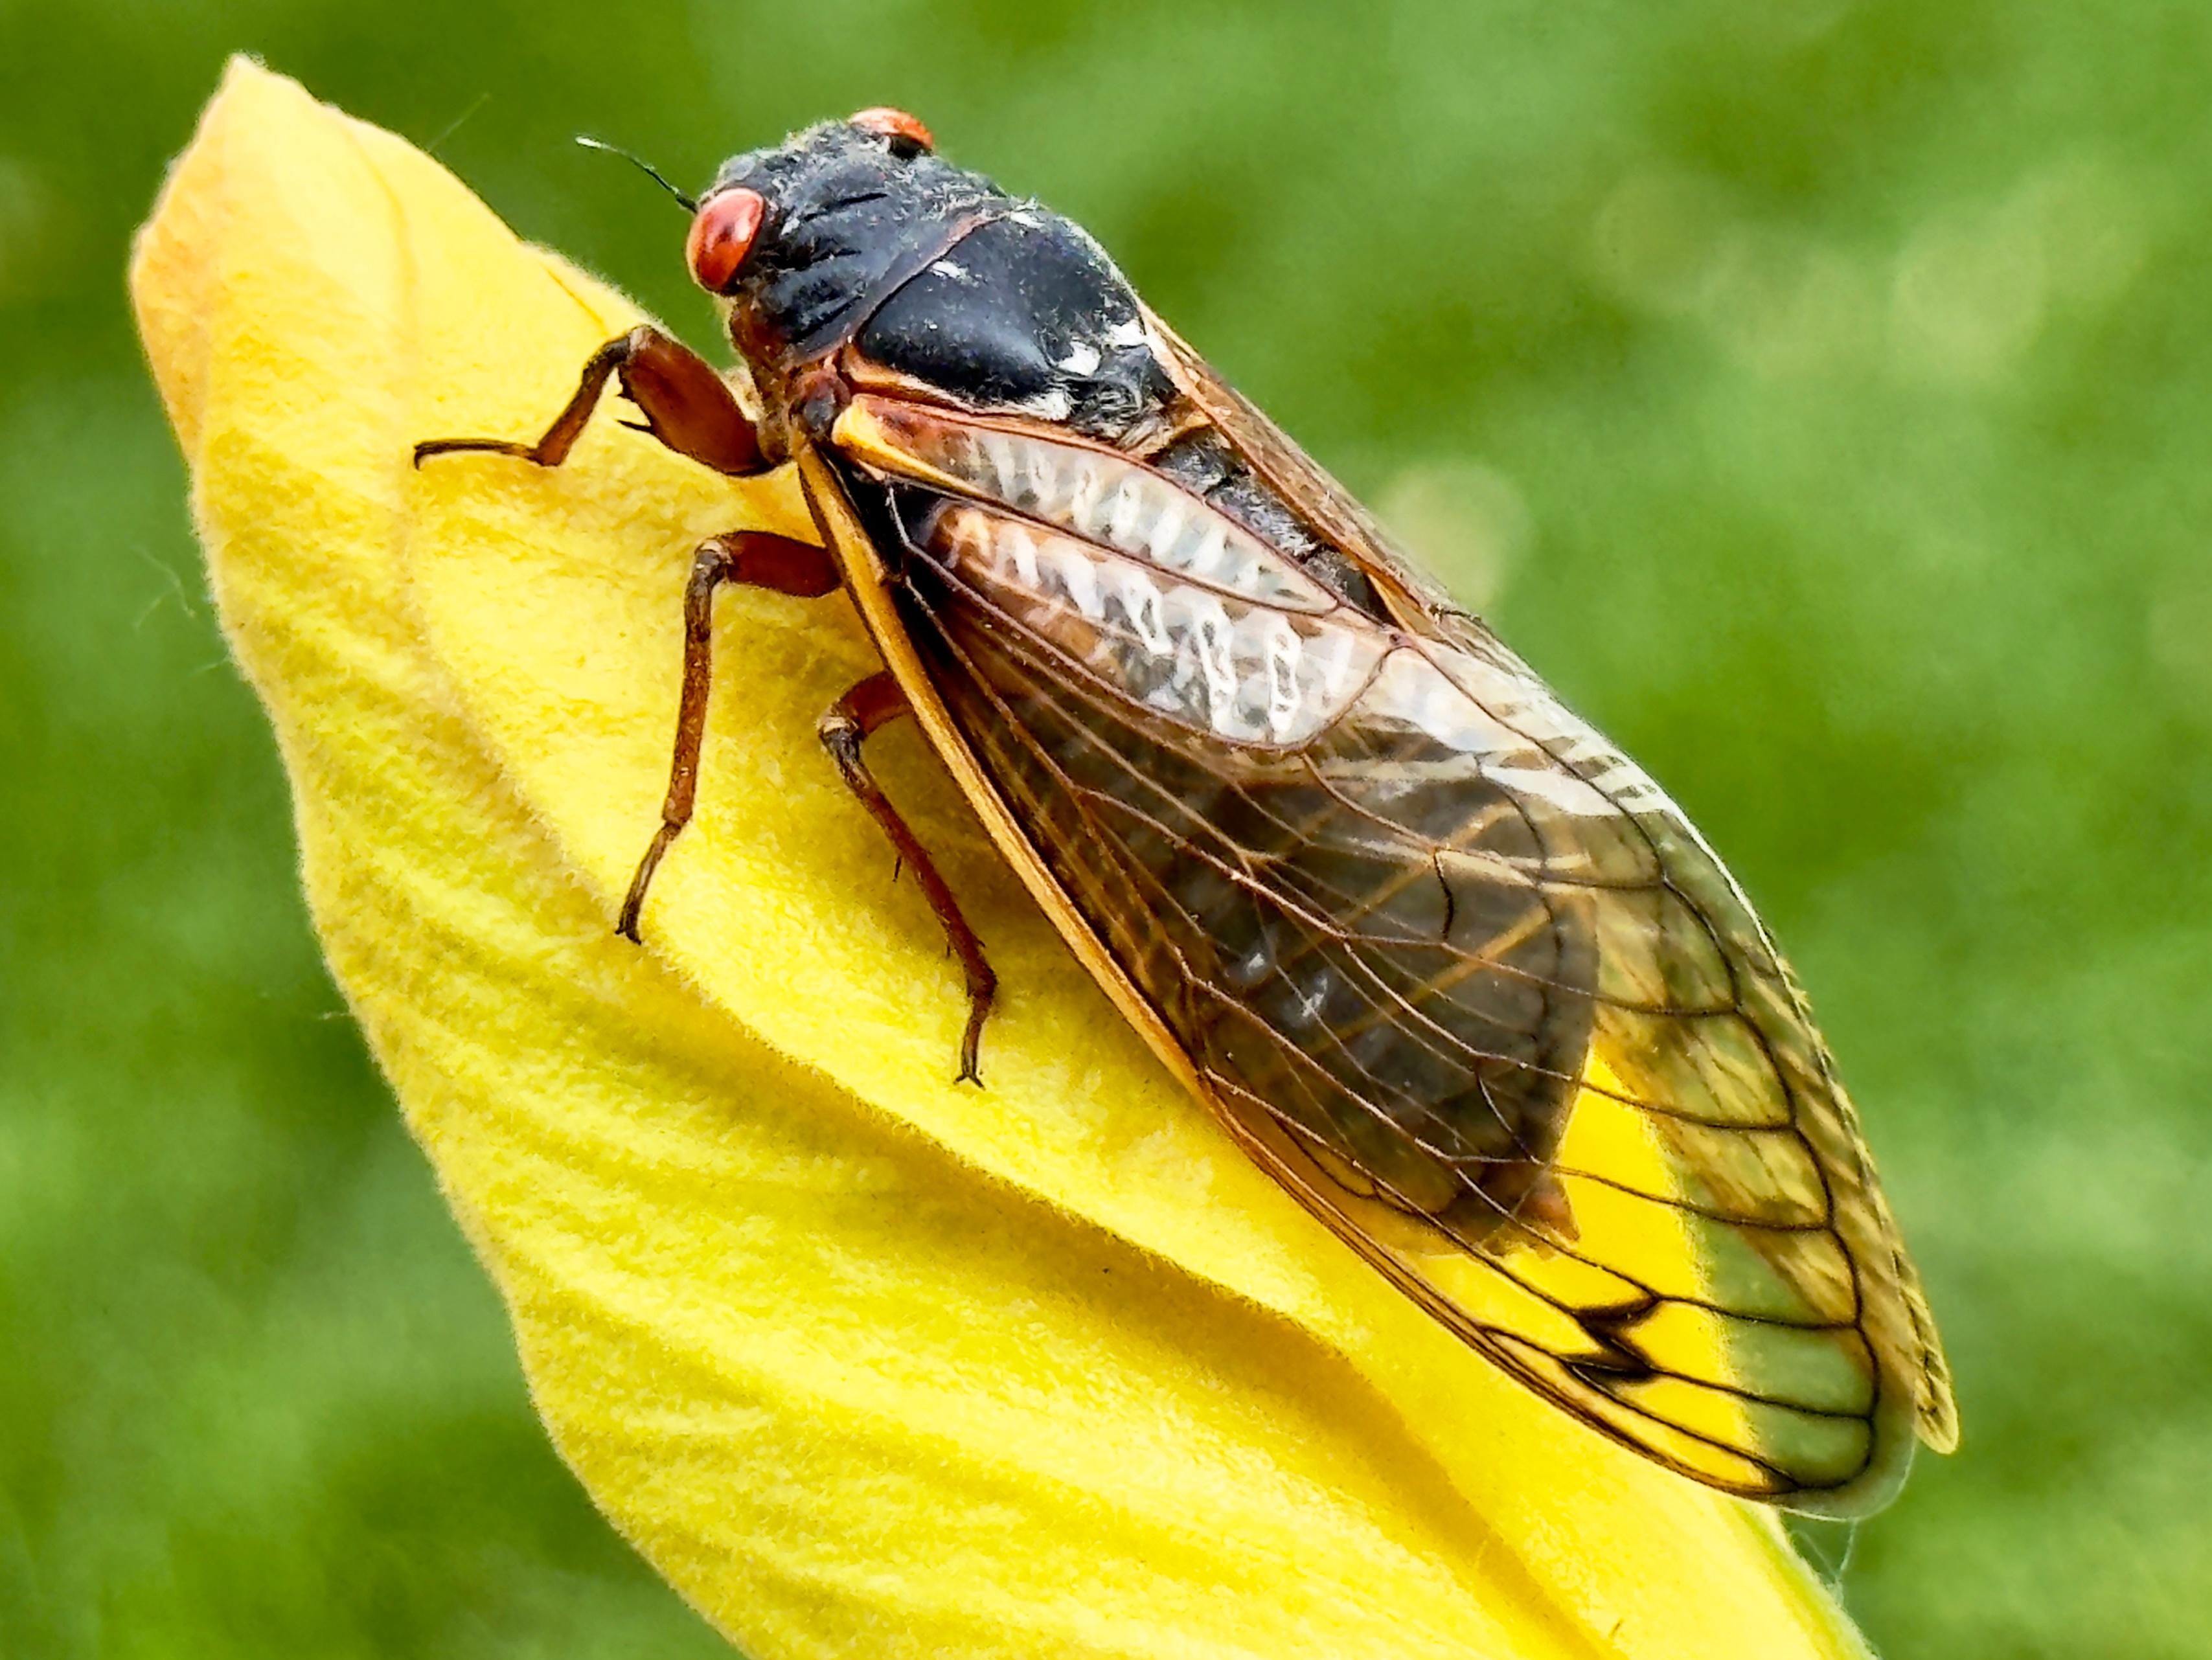 Not hearing that distinct cicada noise yet? Here's why that might be the case